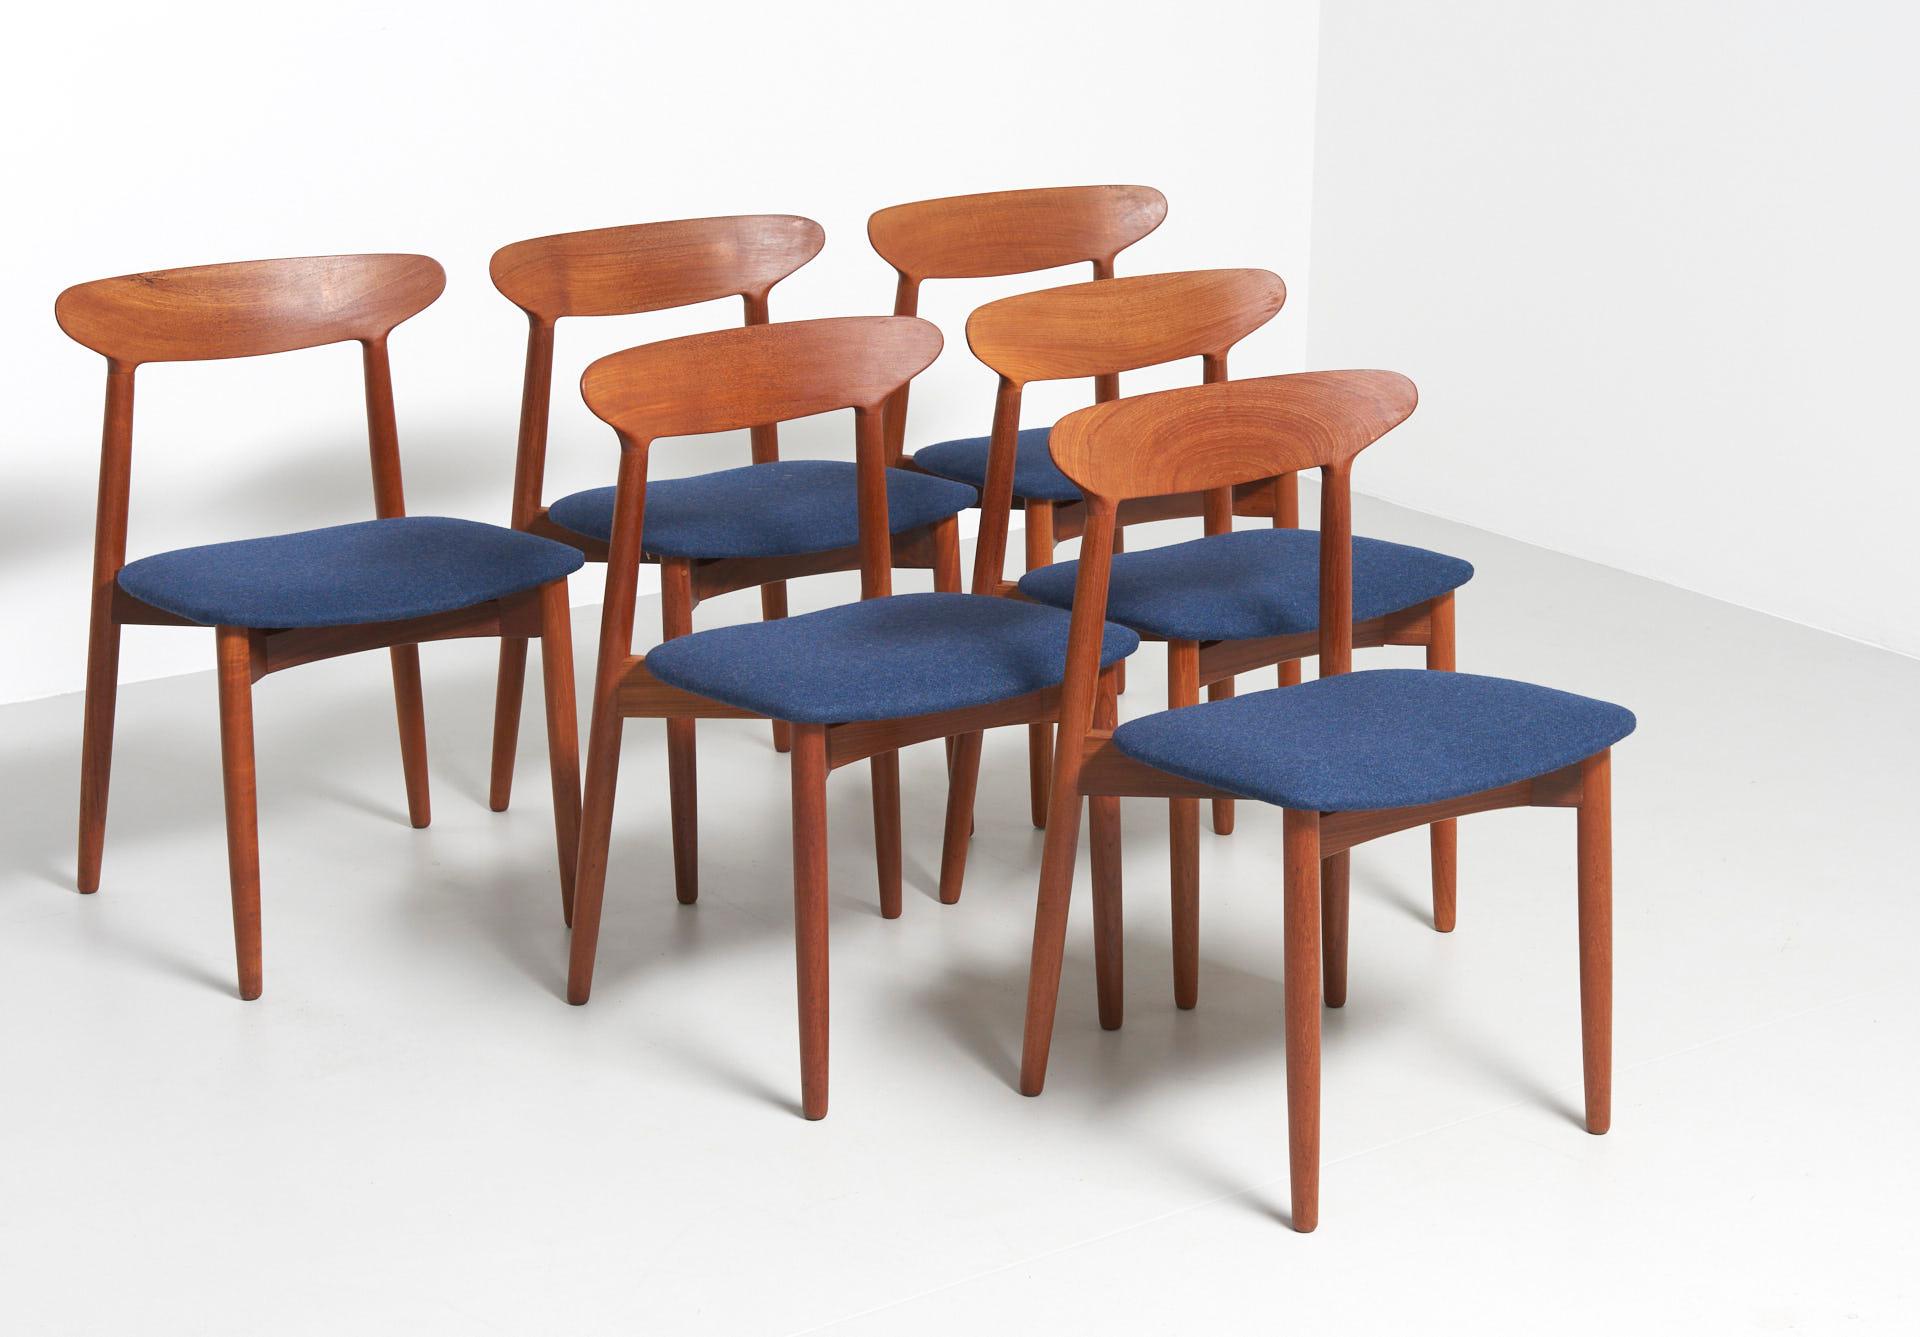 A set of 6 teak dining chairs, Model 59. Design by Harry Østergaard in 1959, made by A/S Randers Møbelfabrik Denmark. Completely restored and reupholstered in soft denim blue felt.